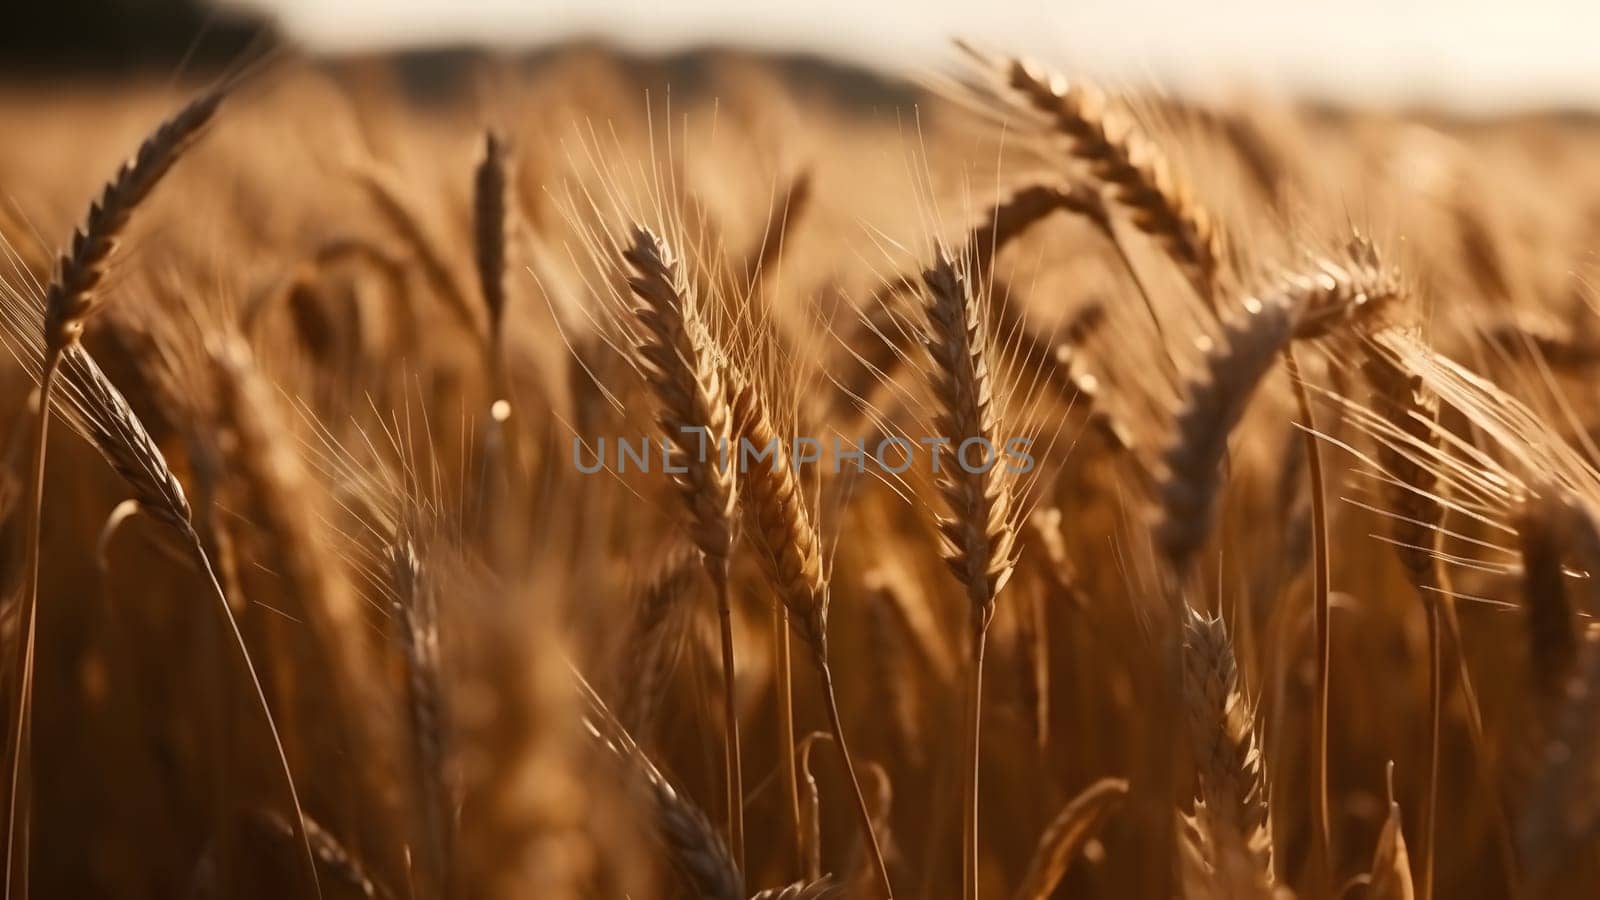 Spikes of ripe wheat at sunny day, close-up with selective focus, neural network generated image by z1b